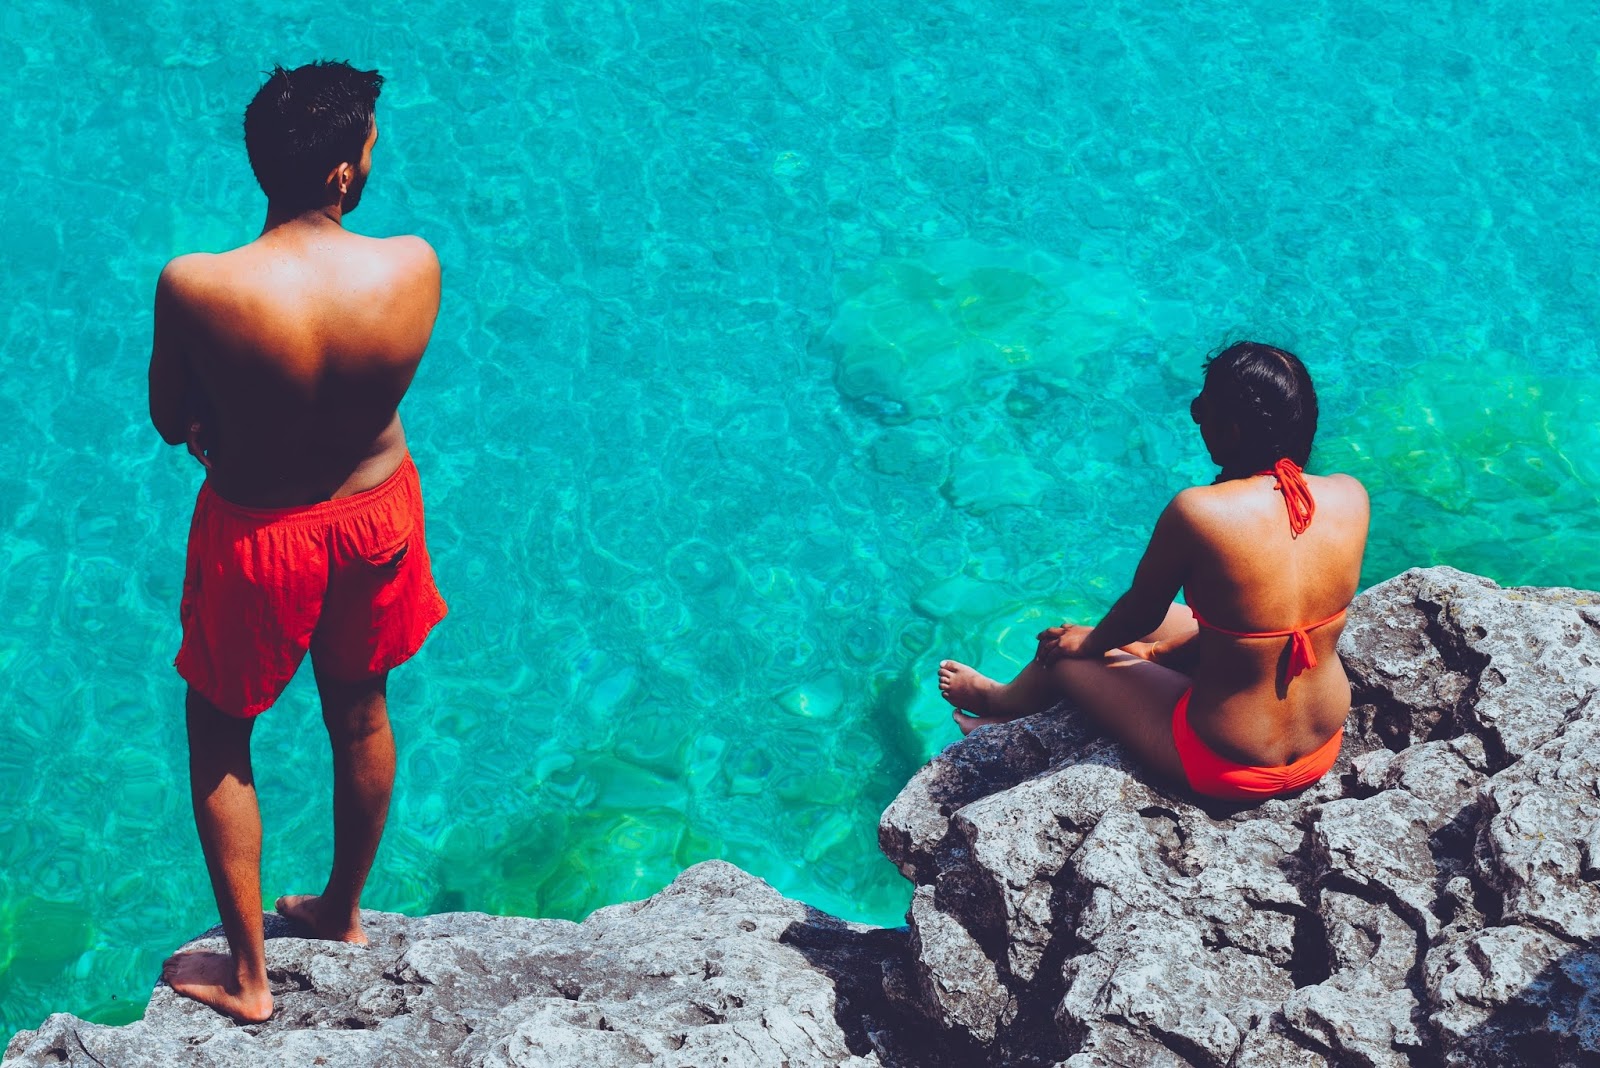 Man and a woman in red swimwear perched on a rock overlooking a bright blue sea